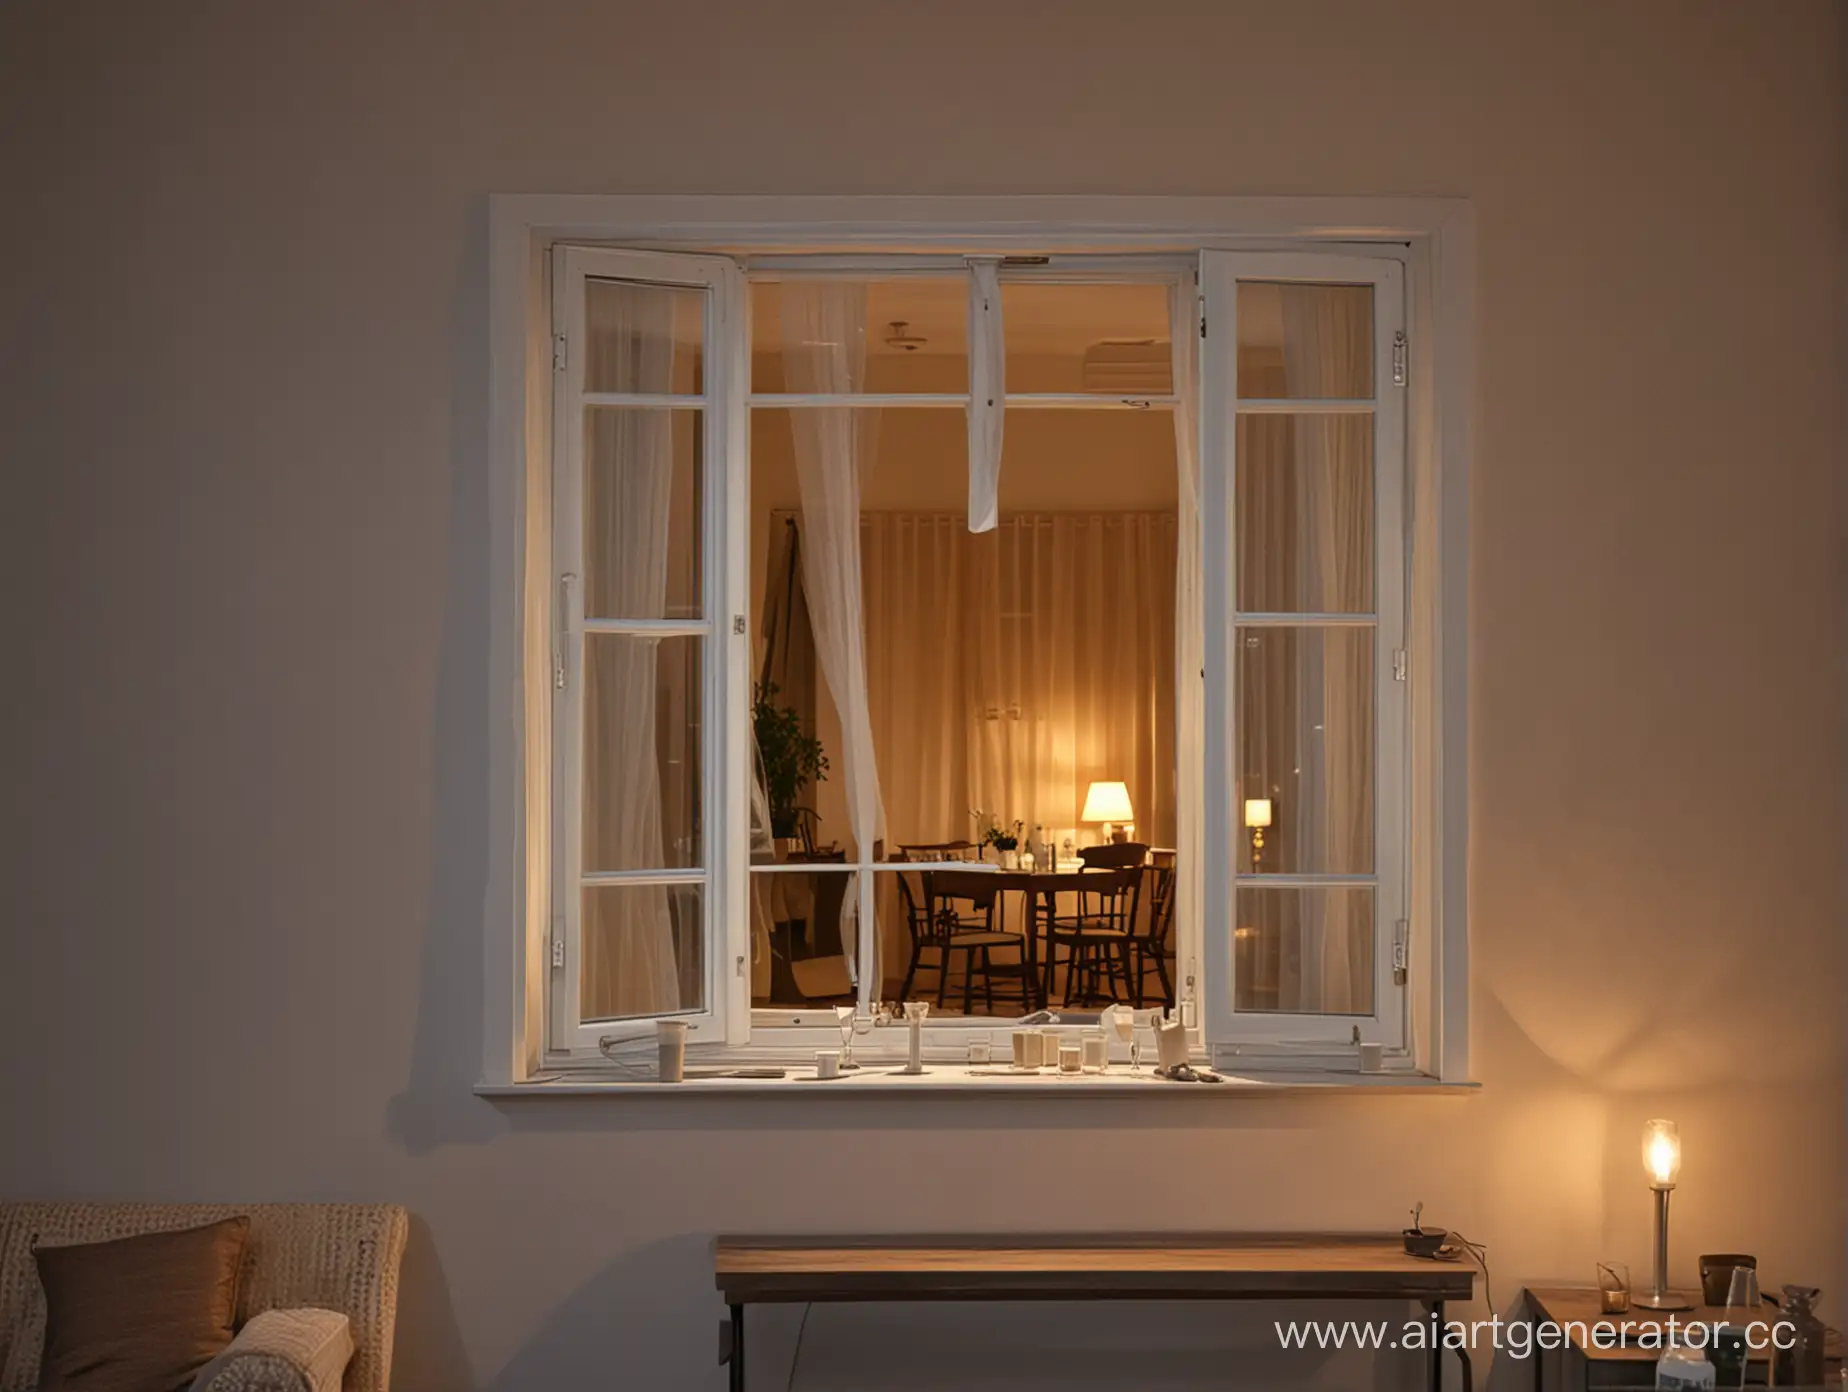 Romantic-Evening-Scene-in-an-Urban-Apartment-with-Window-View